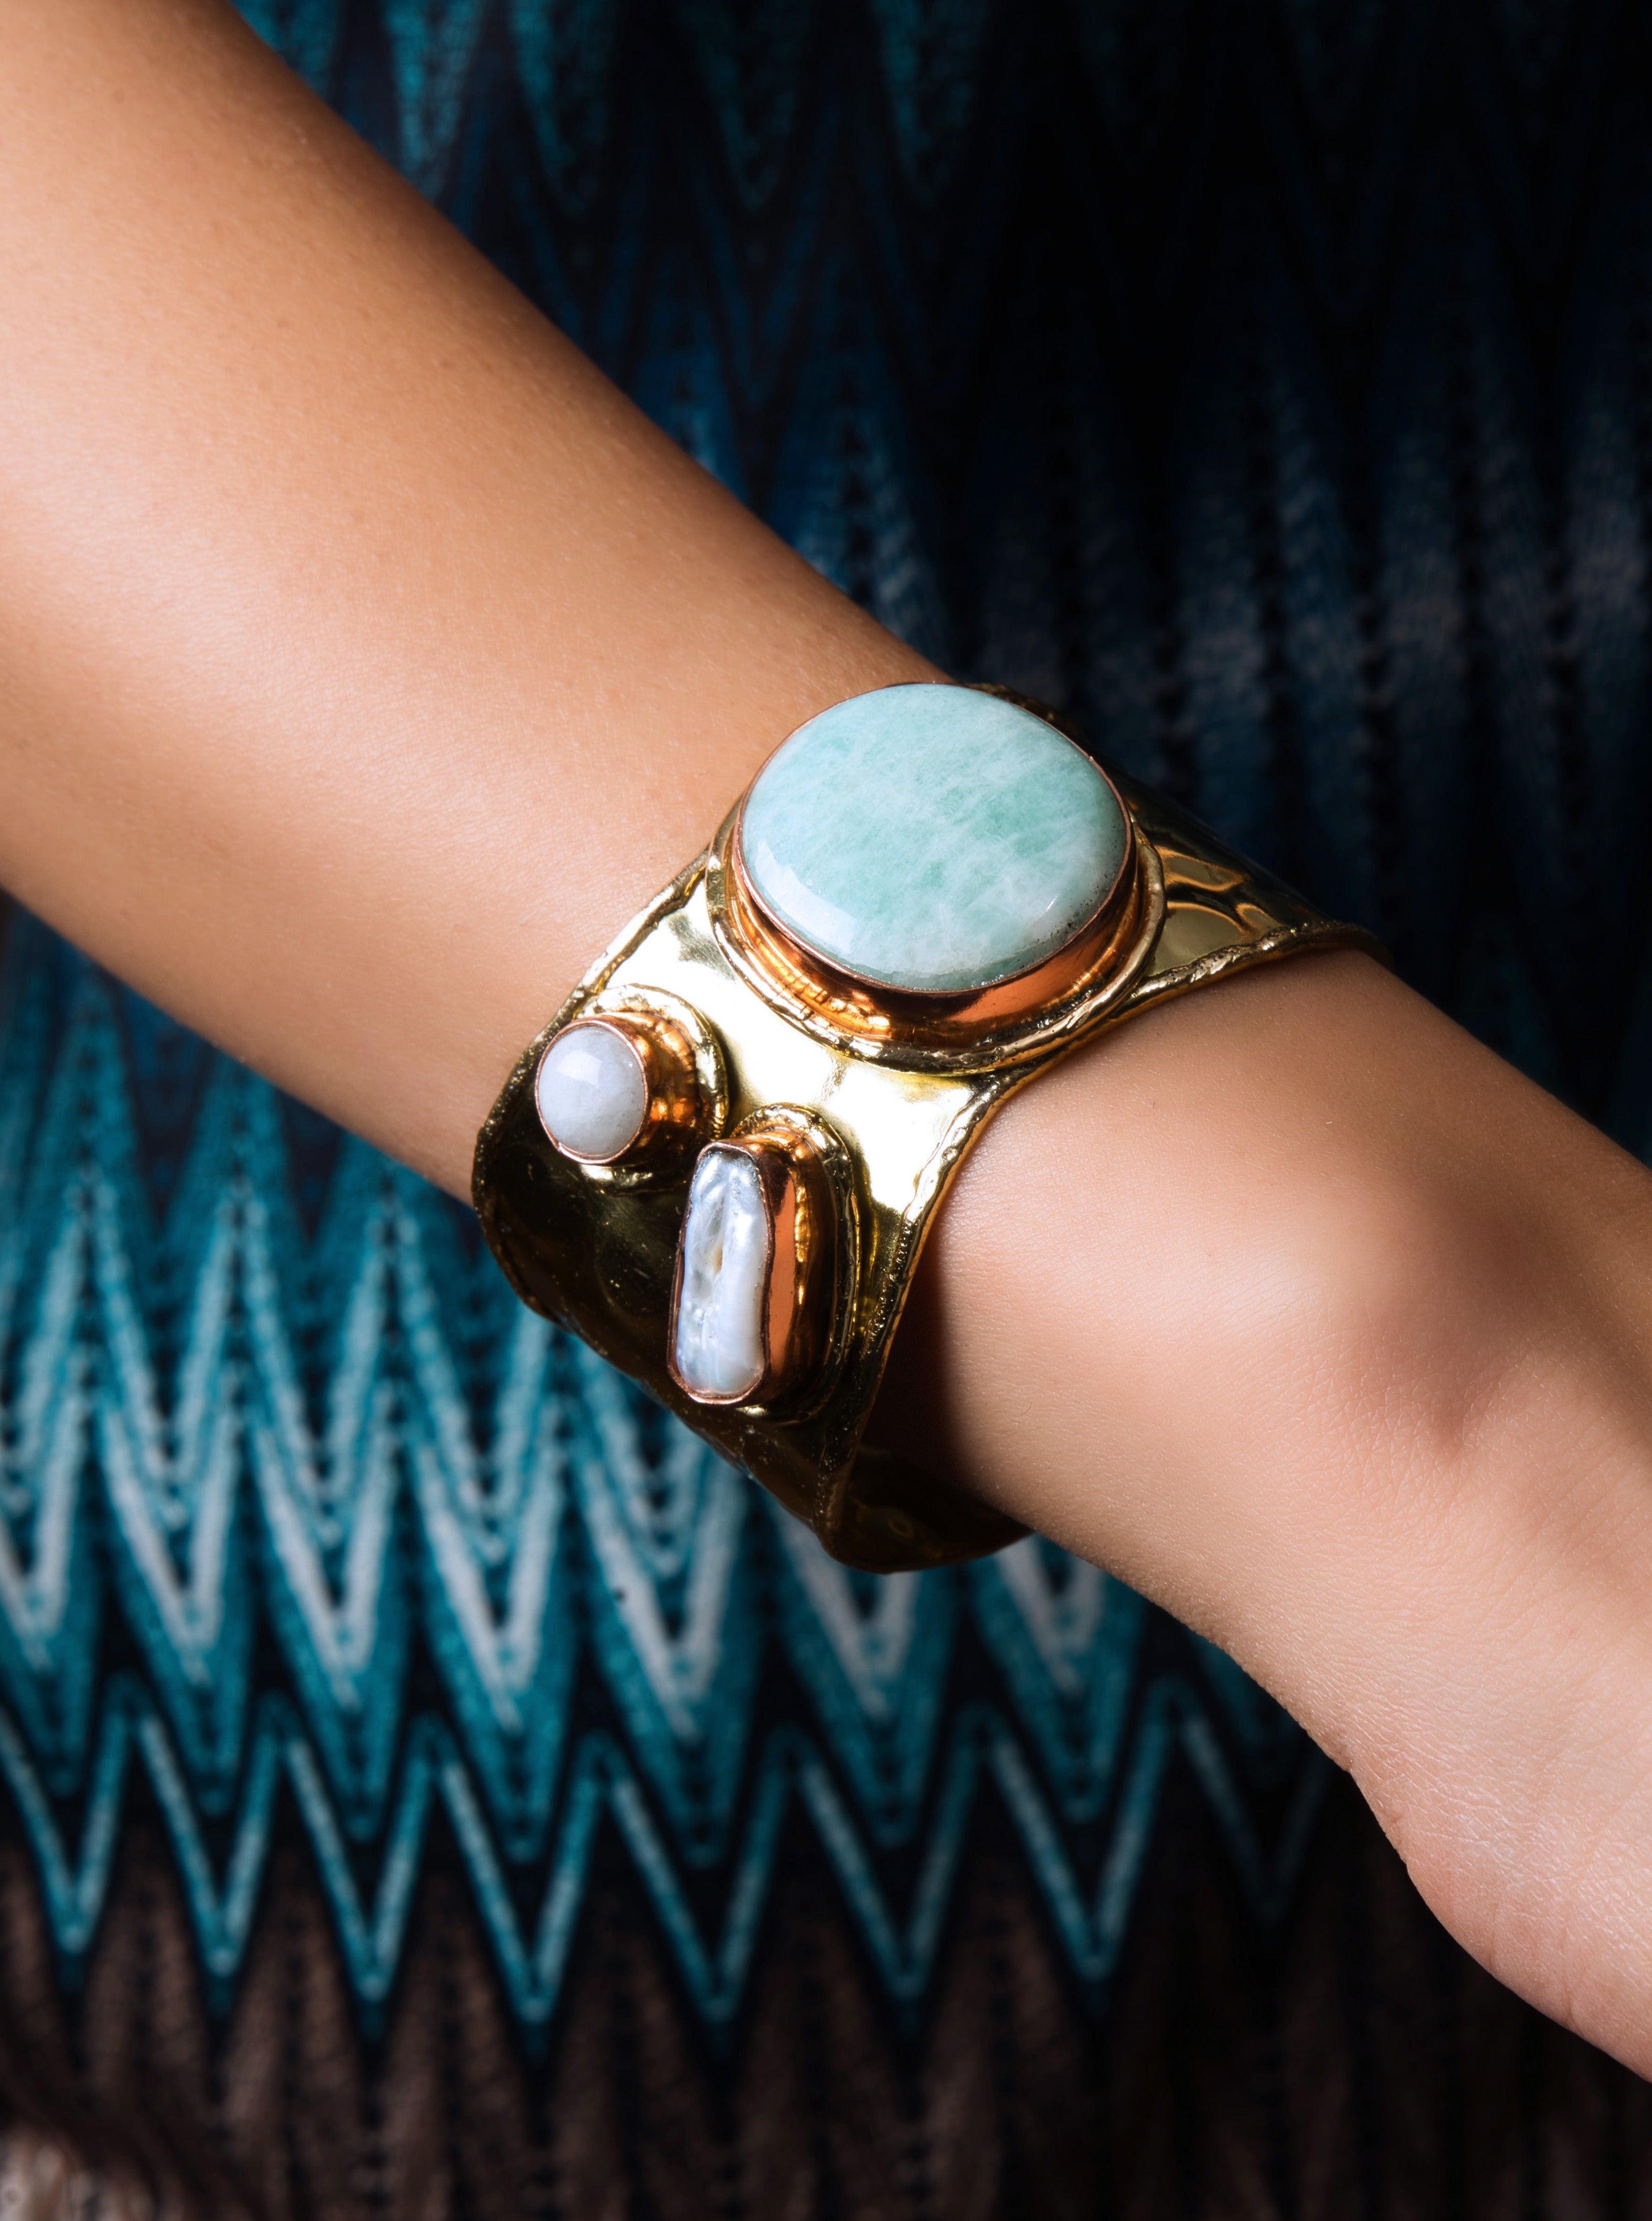 Opulent turquoise and white stone cuff: Chic, handcrafted elegance